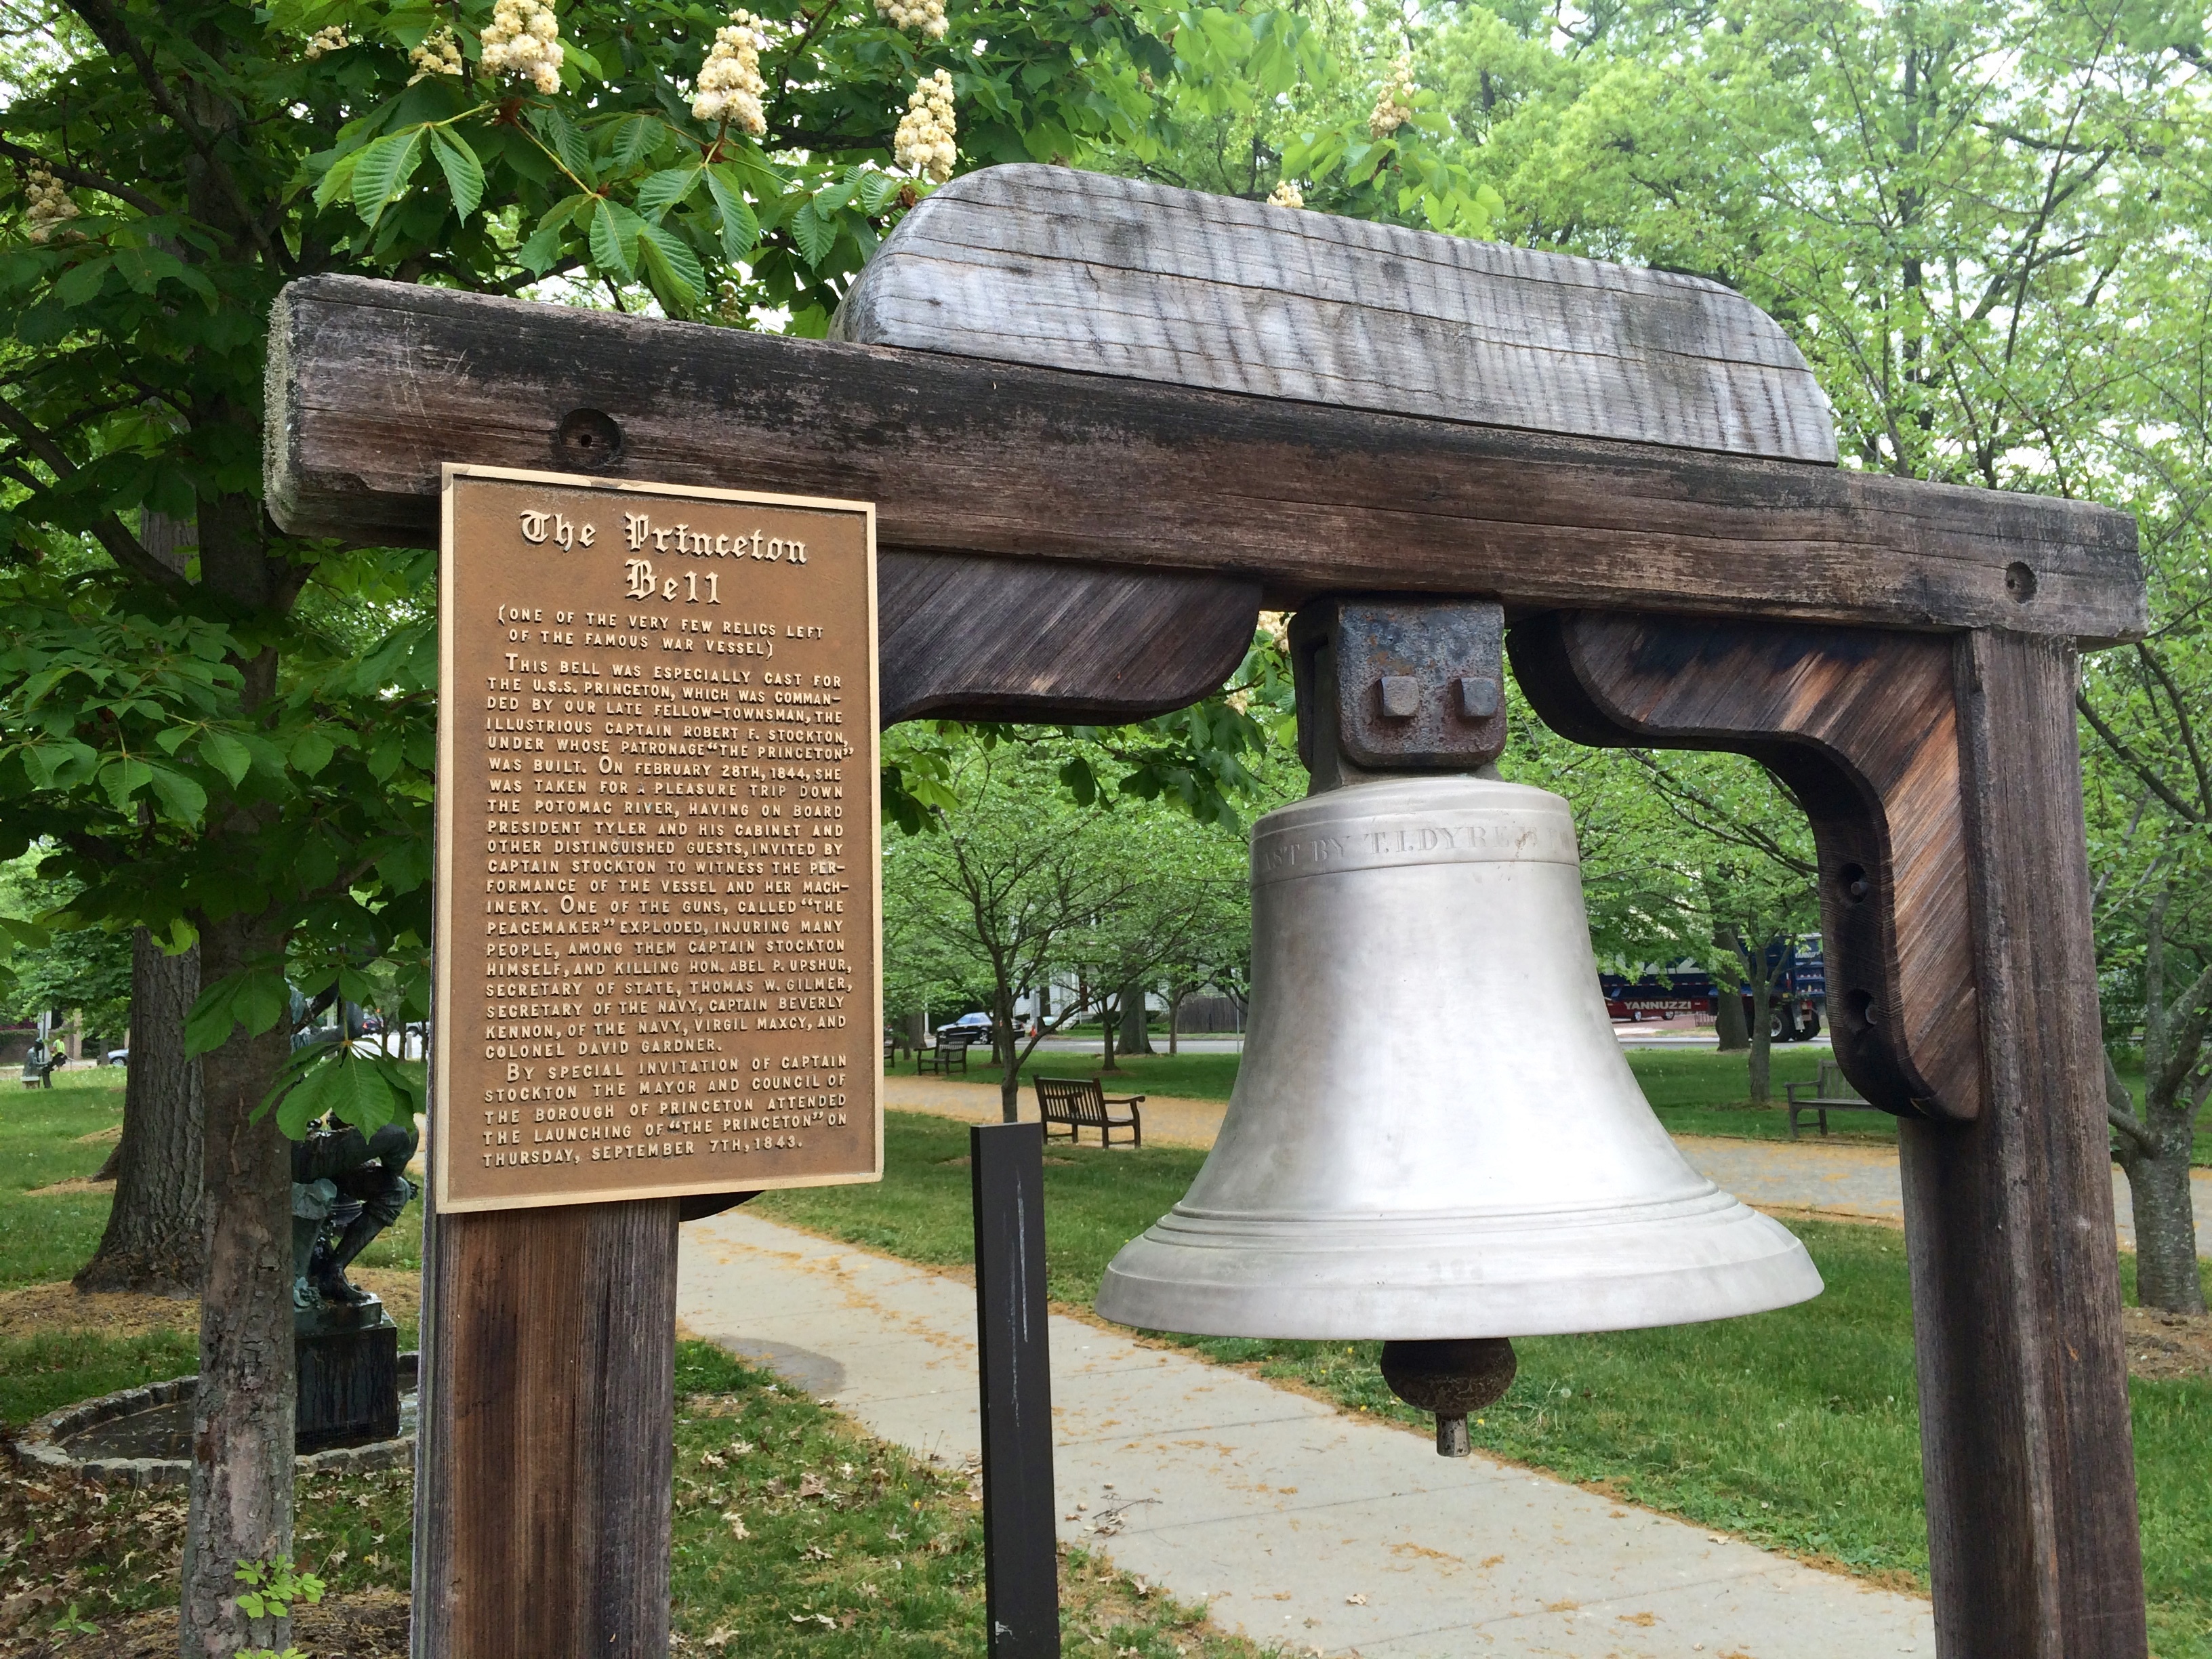 Bell of the U.S.S. Princeton